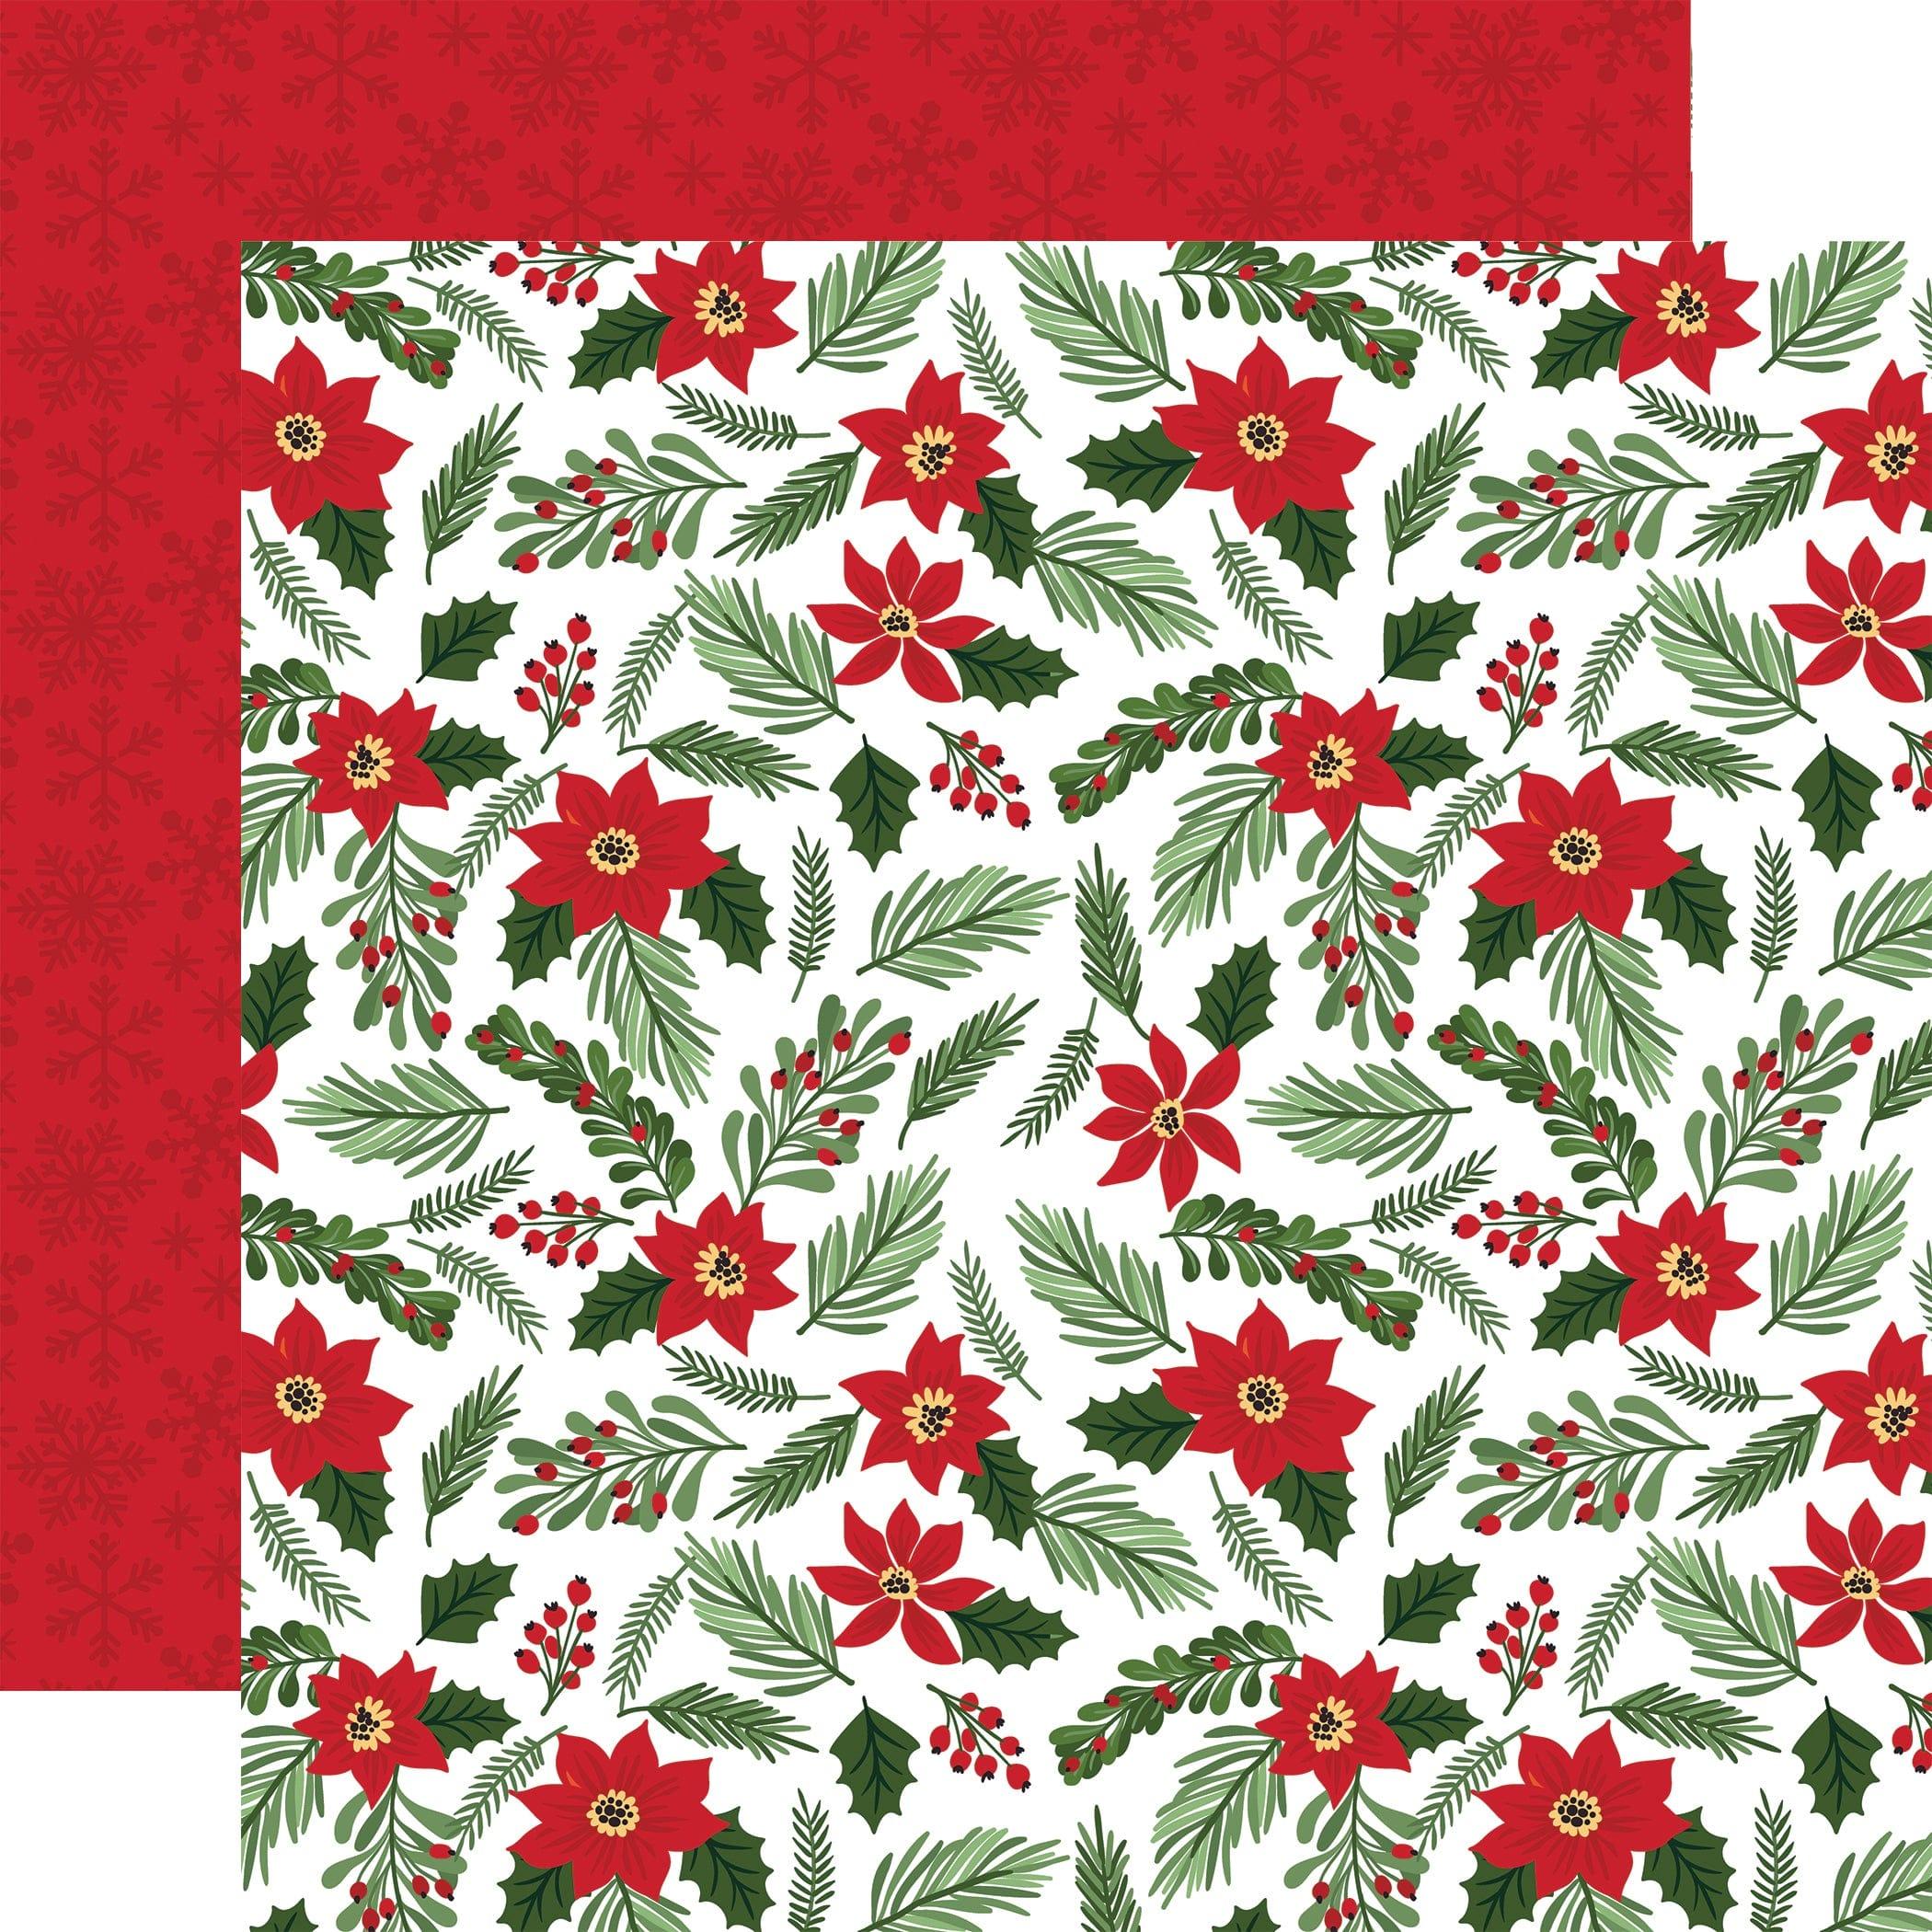 The Magic of Christmas Collection Poinsettias And Pine 12 x 12 Double-Sided Scrapbook Paper by Echo Park Paper - Scrapbook Supply Companies